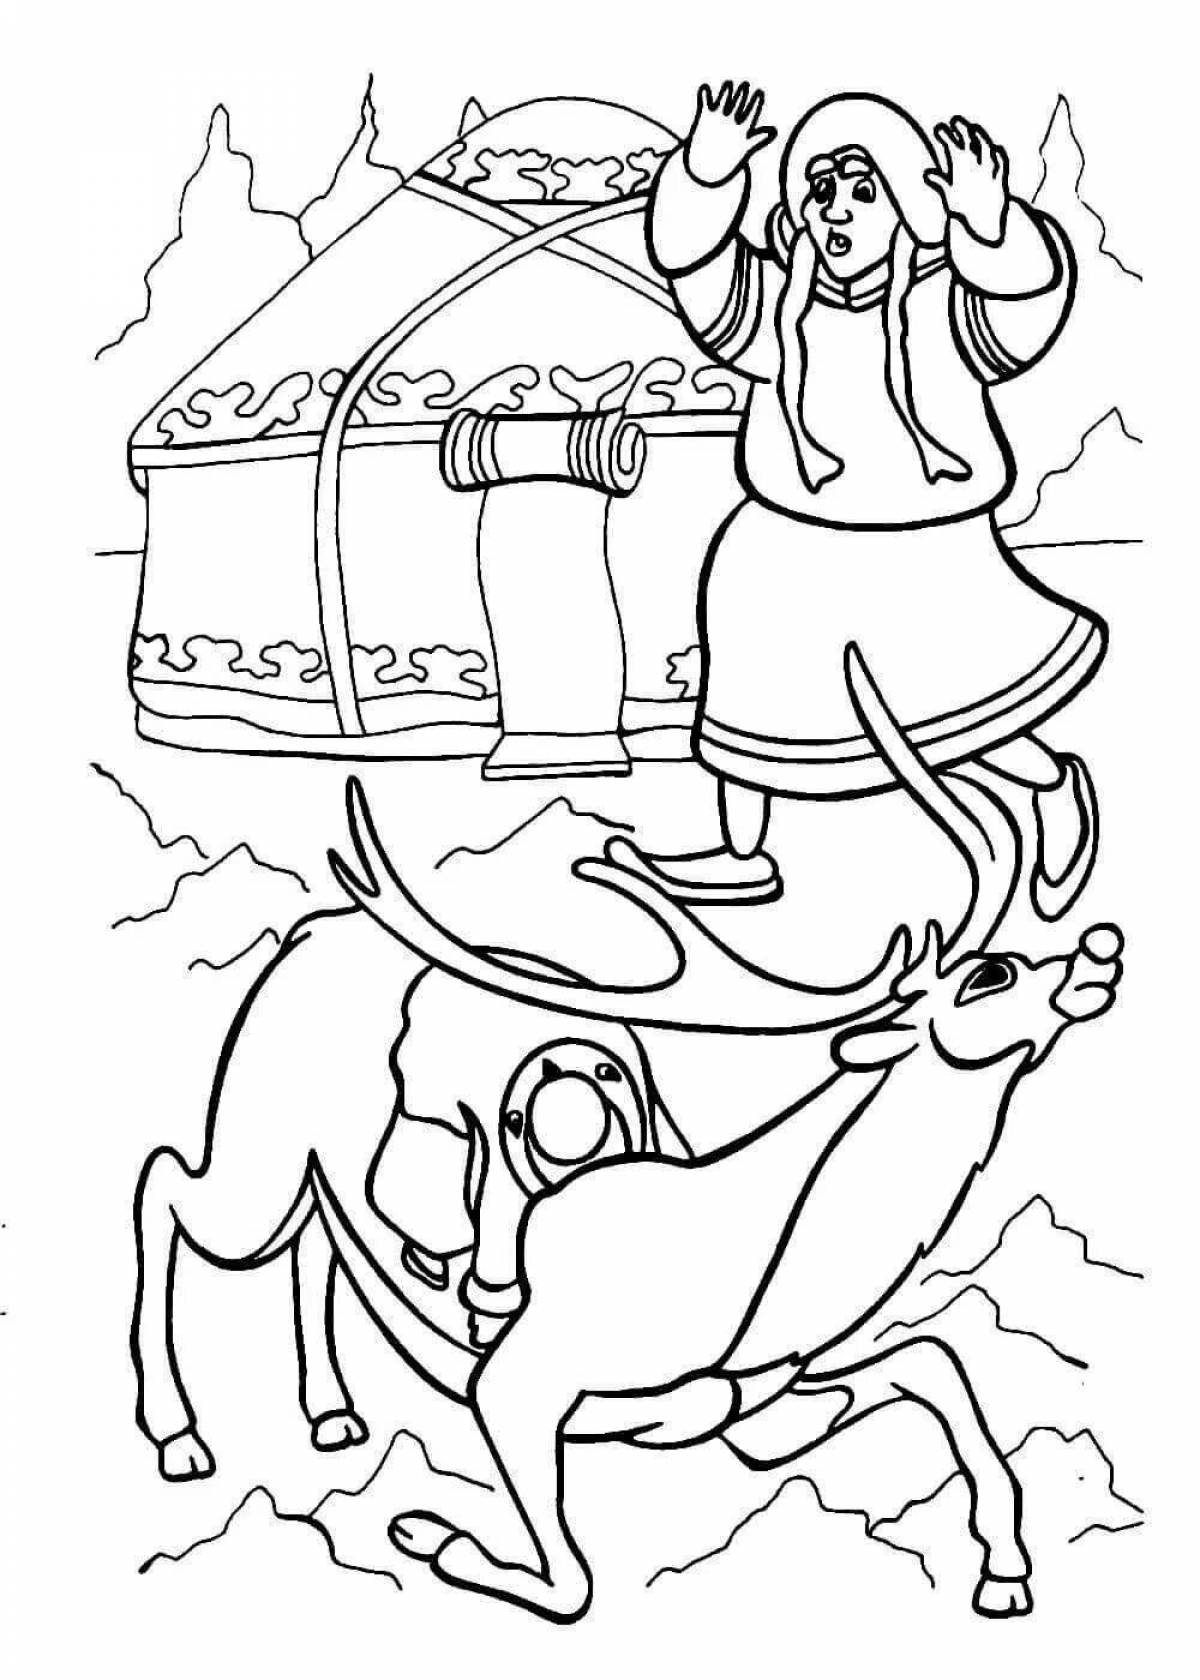 Joyful Sami Coloring Pages for Toddlers